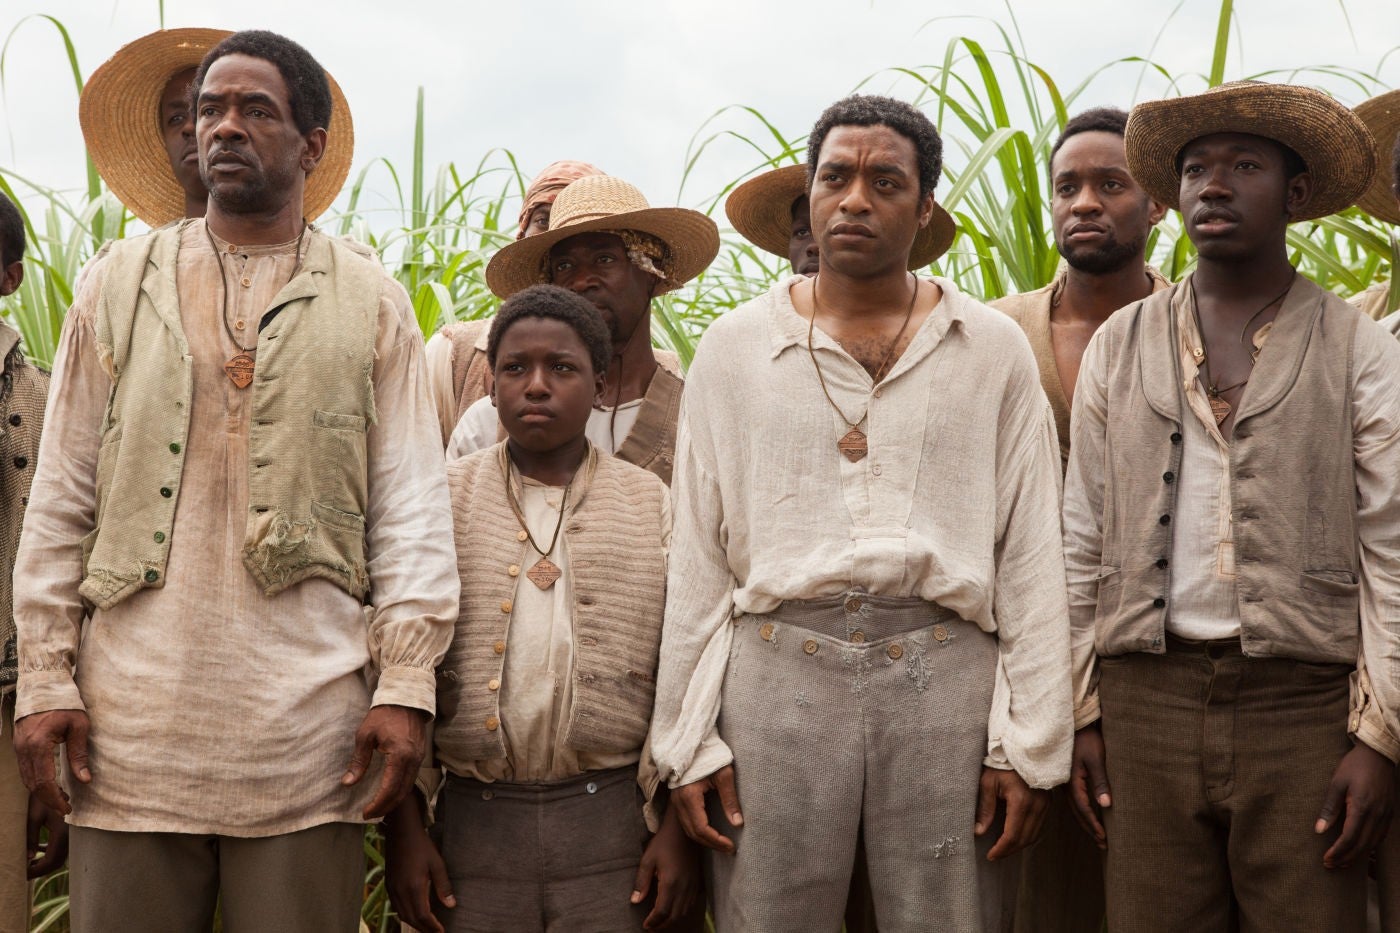 '12 Years a Slave' Receives Costume Design Award